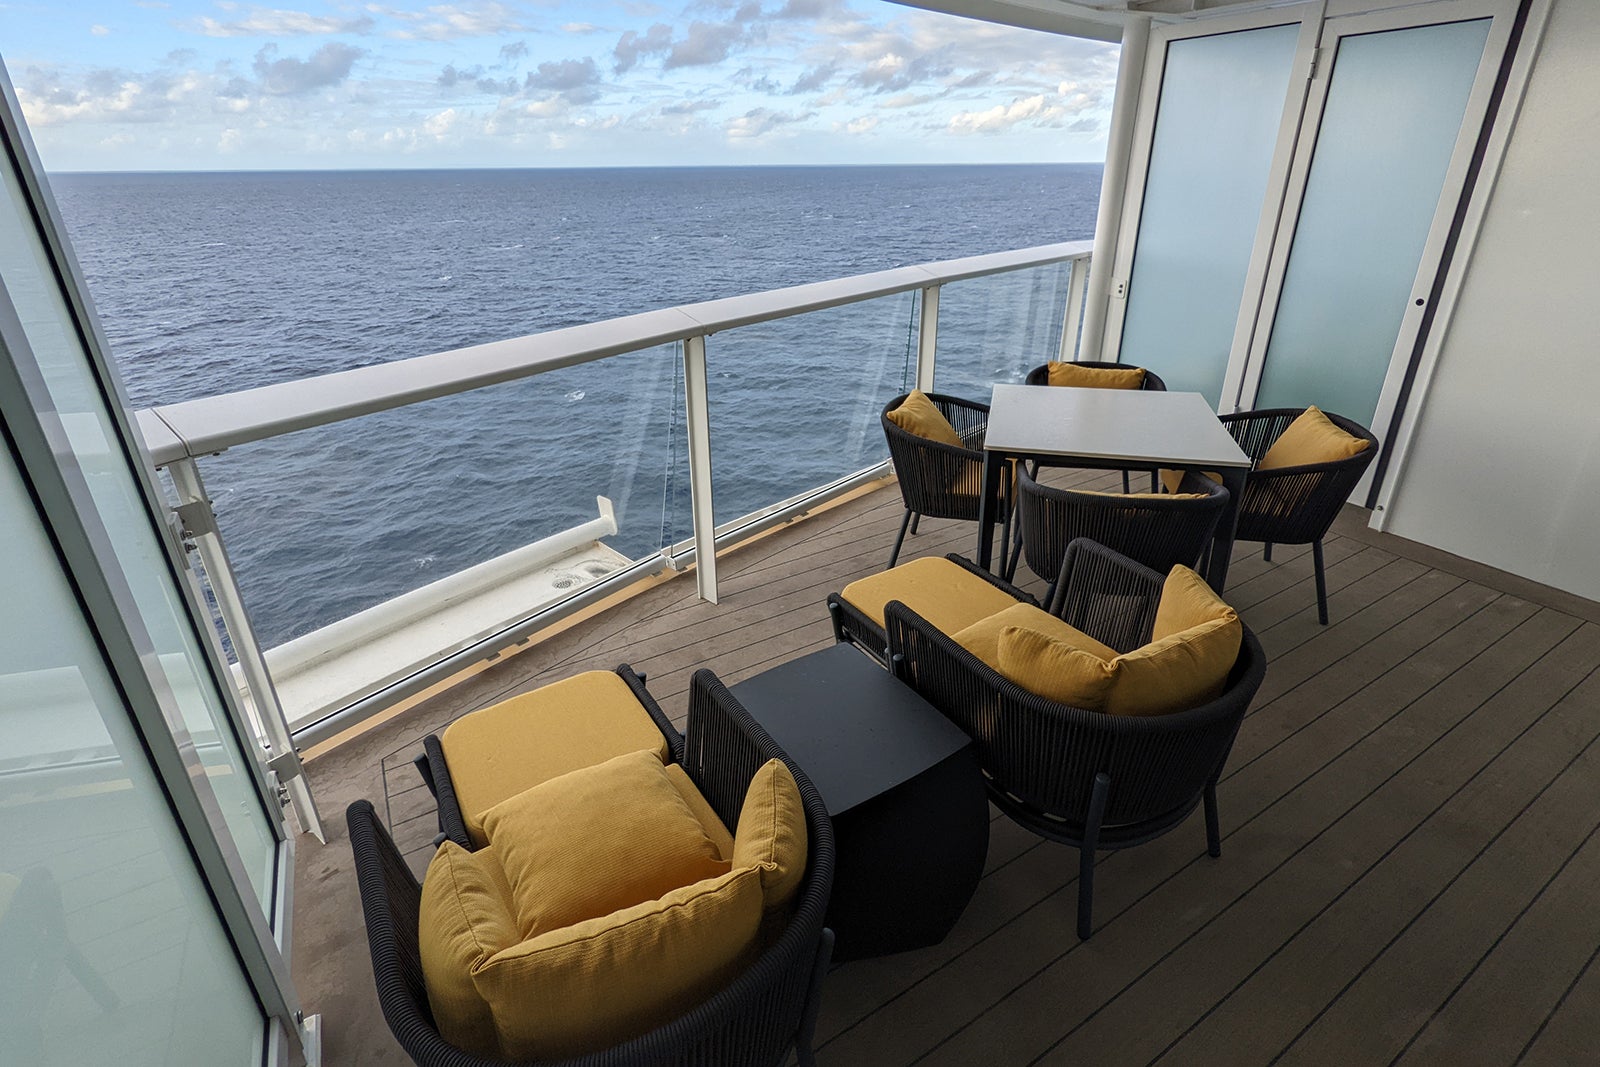 Cruise ship balcony with wicker furniture topped with yellow pillows